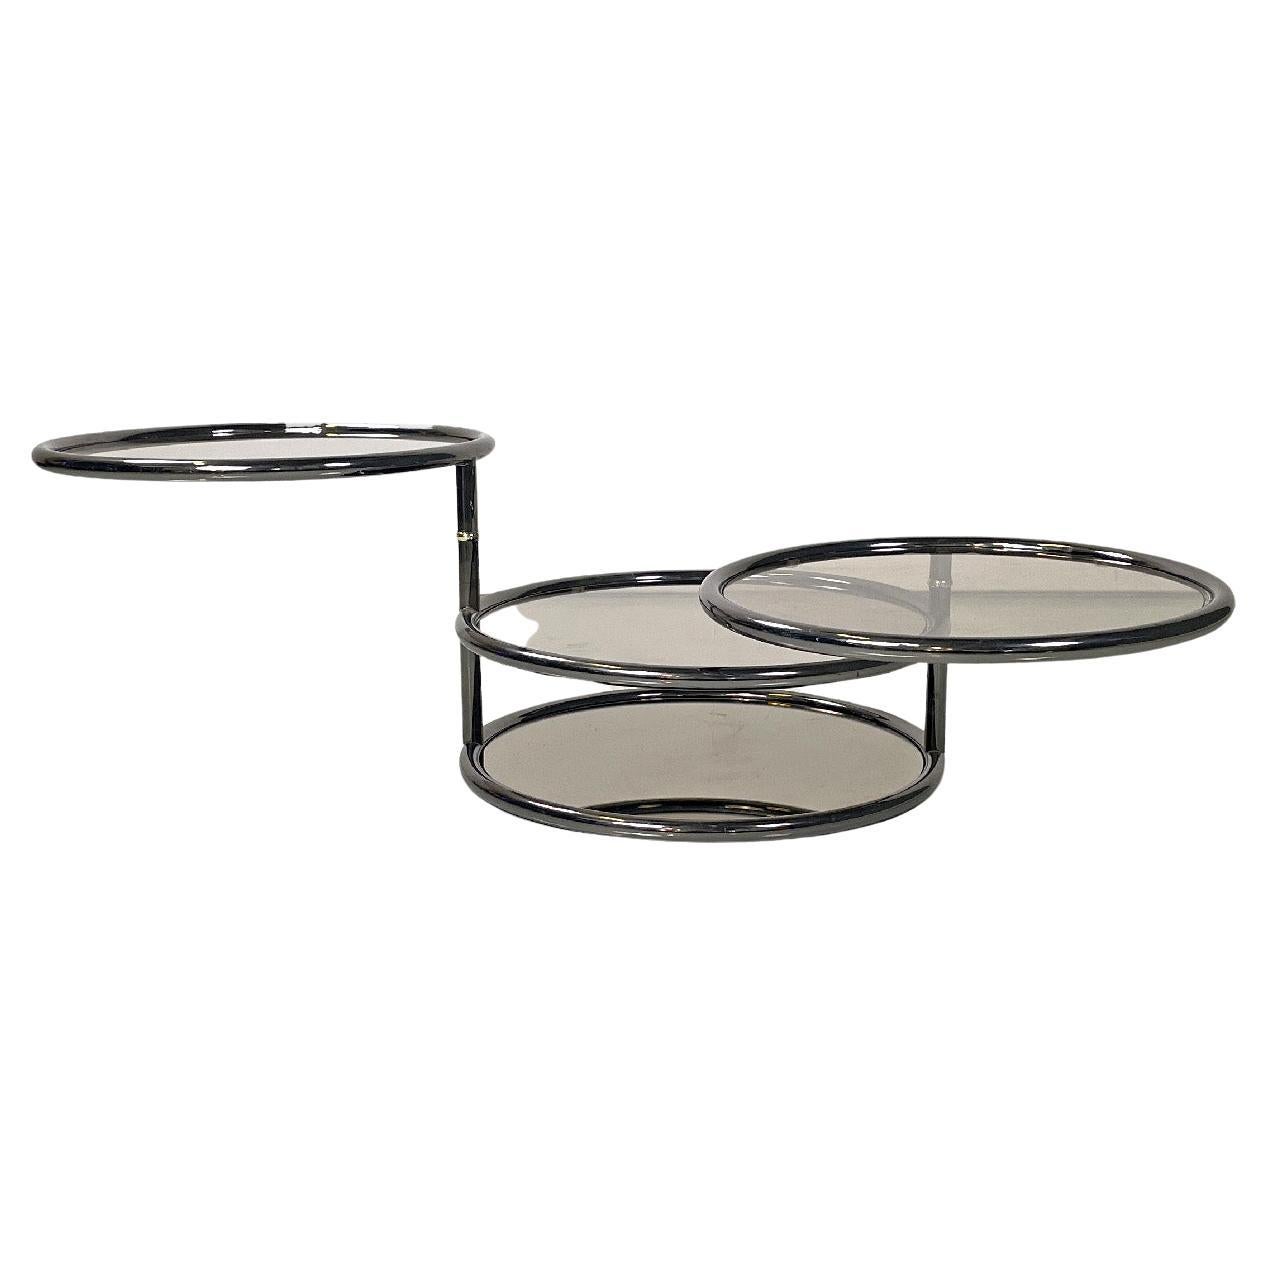 Italian modern coffee table in smoked glass and metal with swivel tops, 1970s For Sale